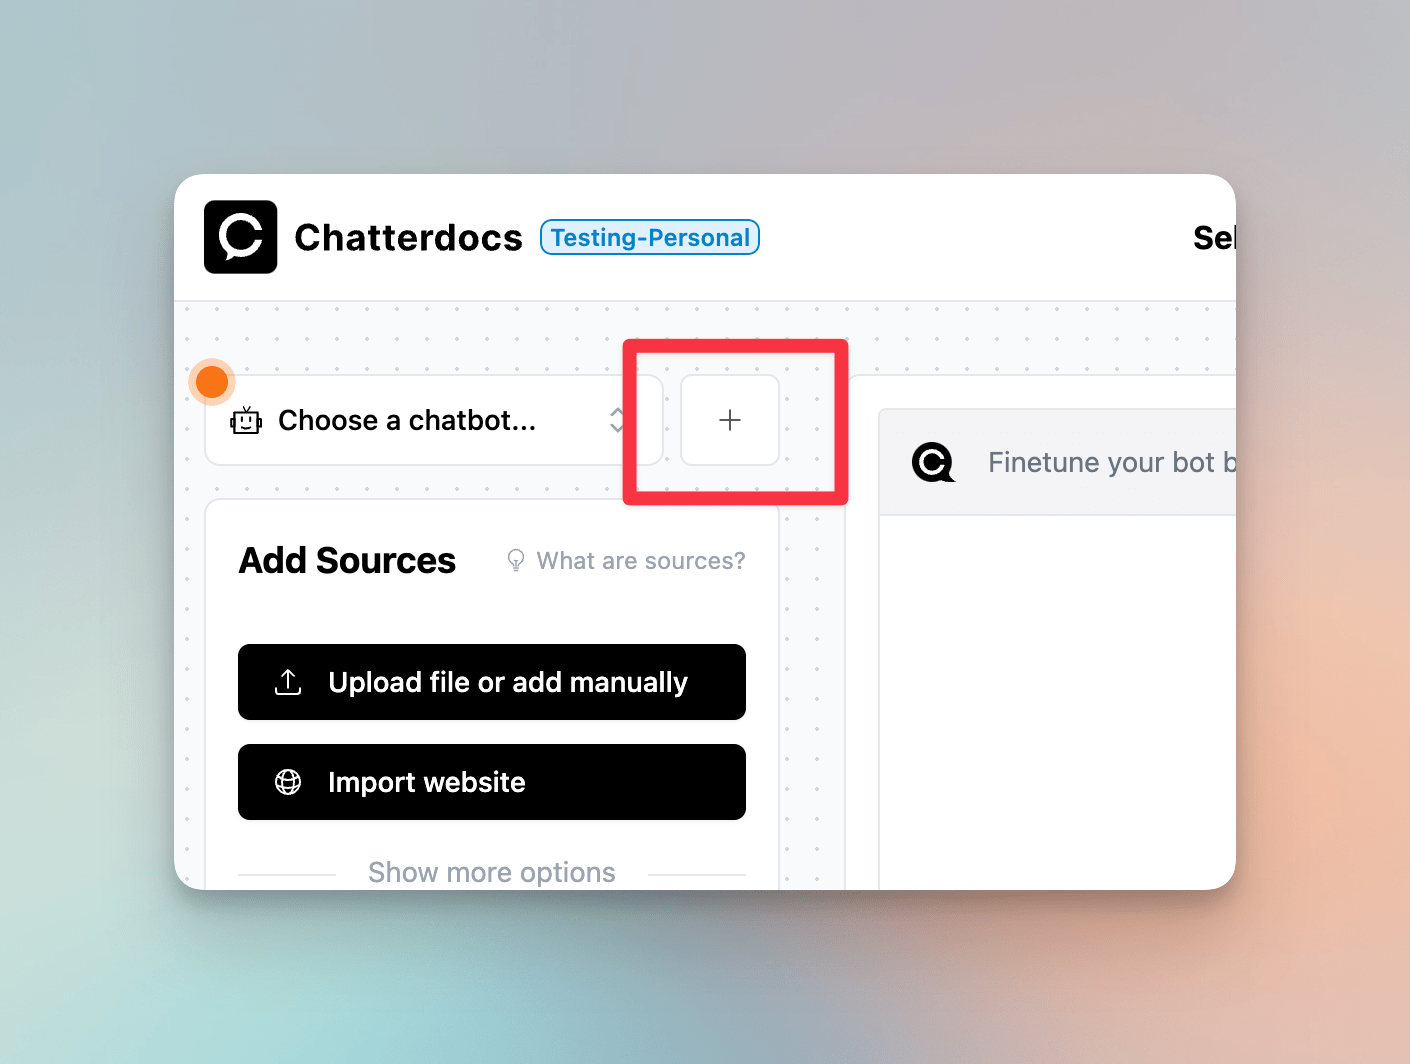 Create a new chatbot